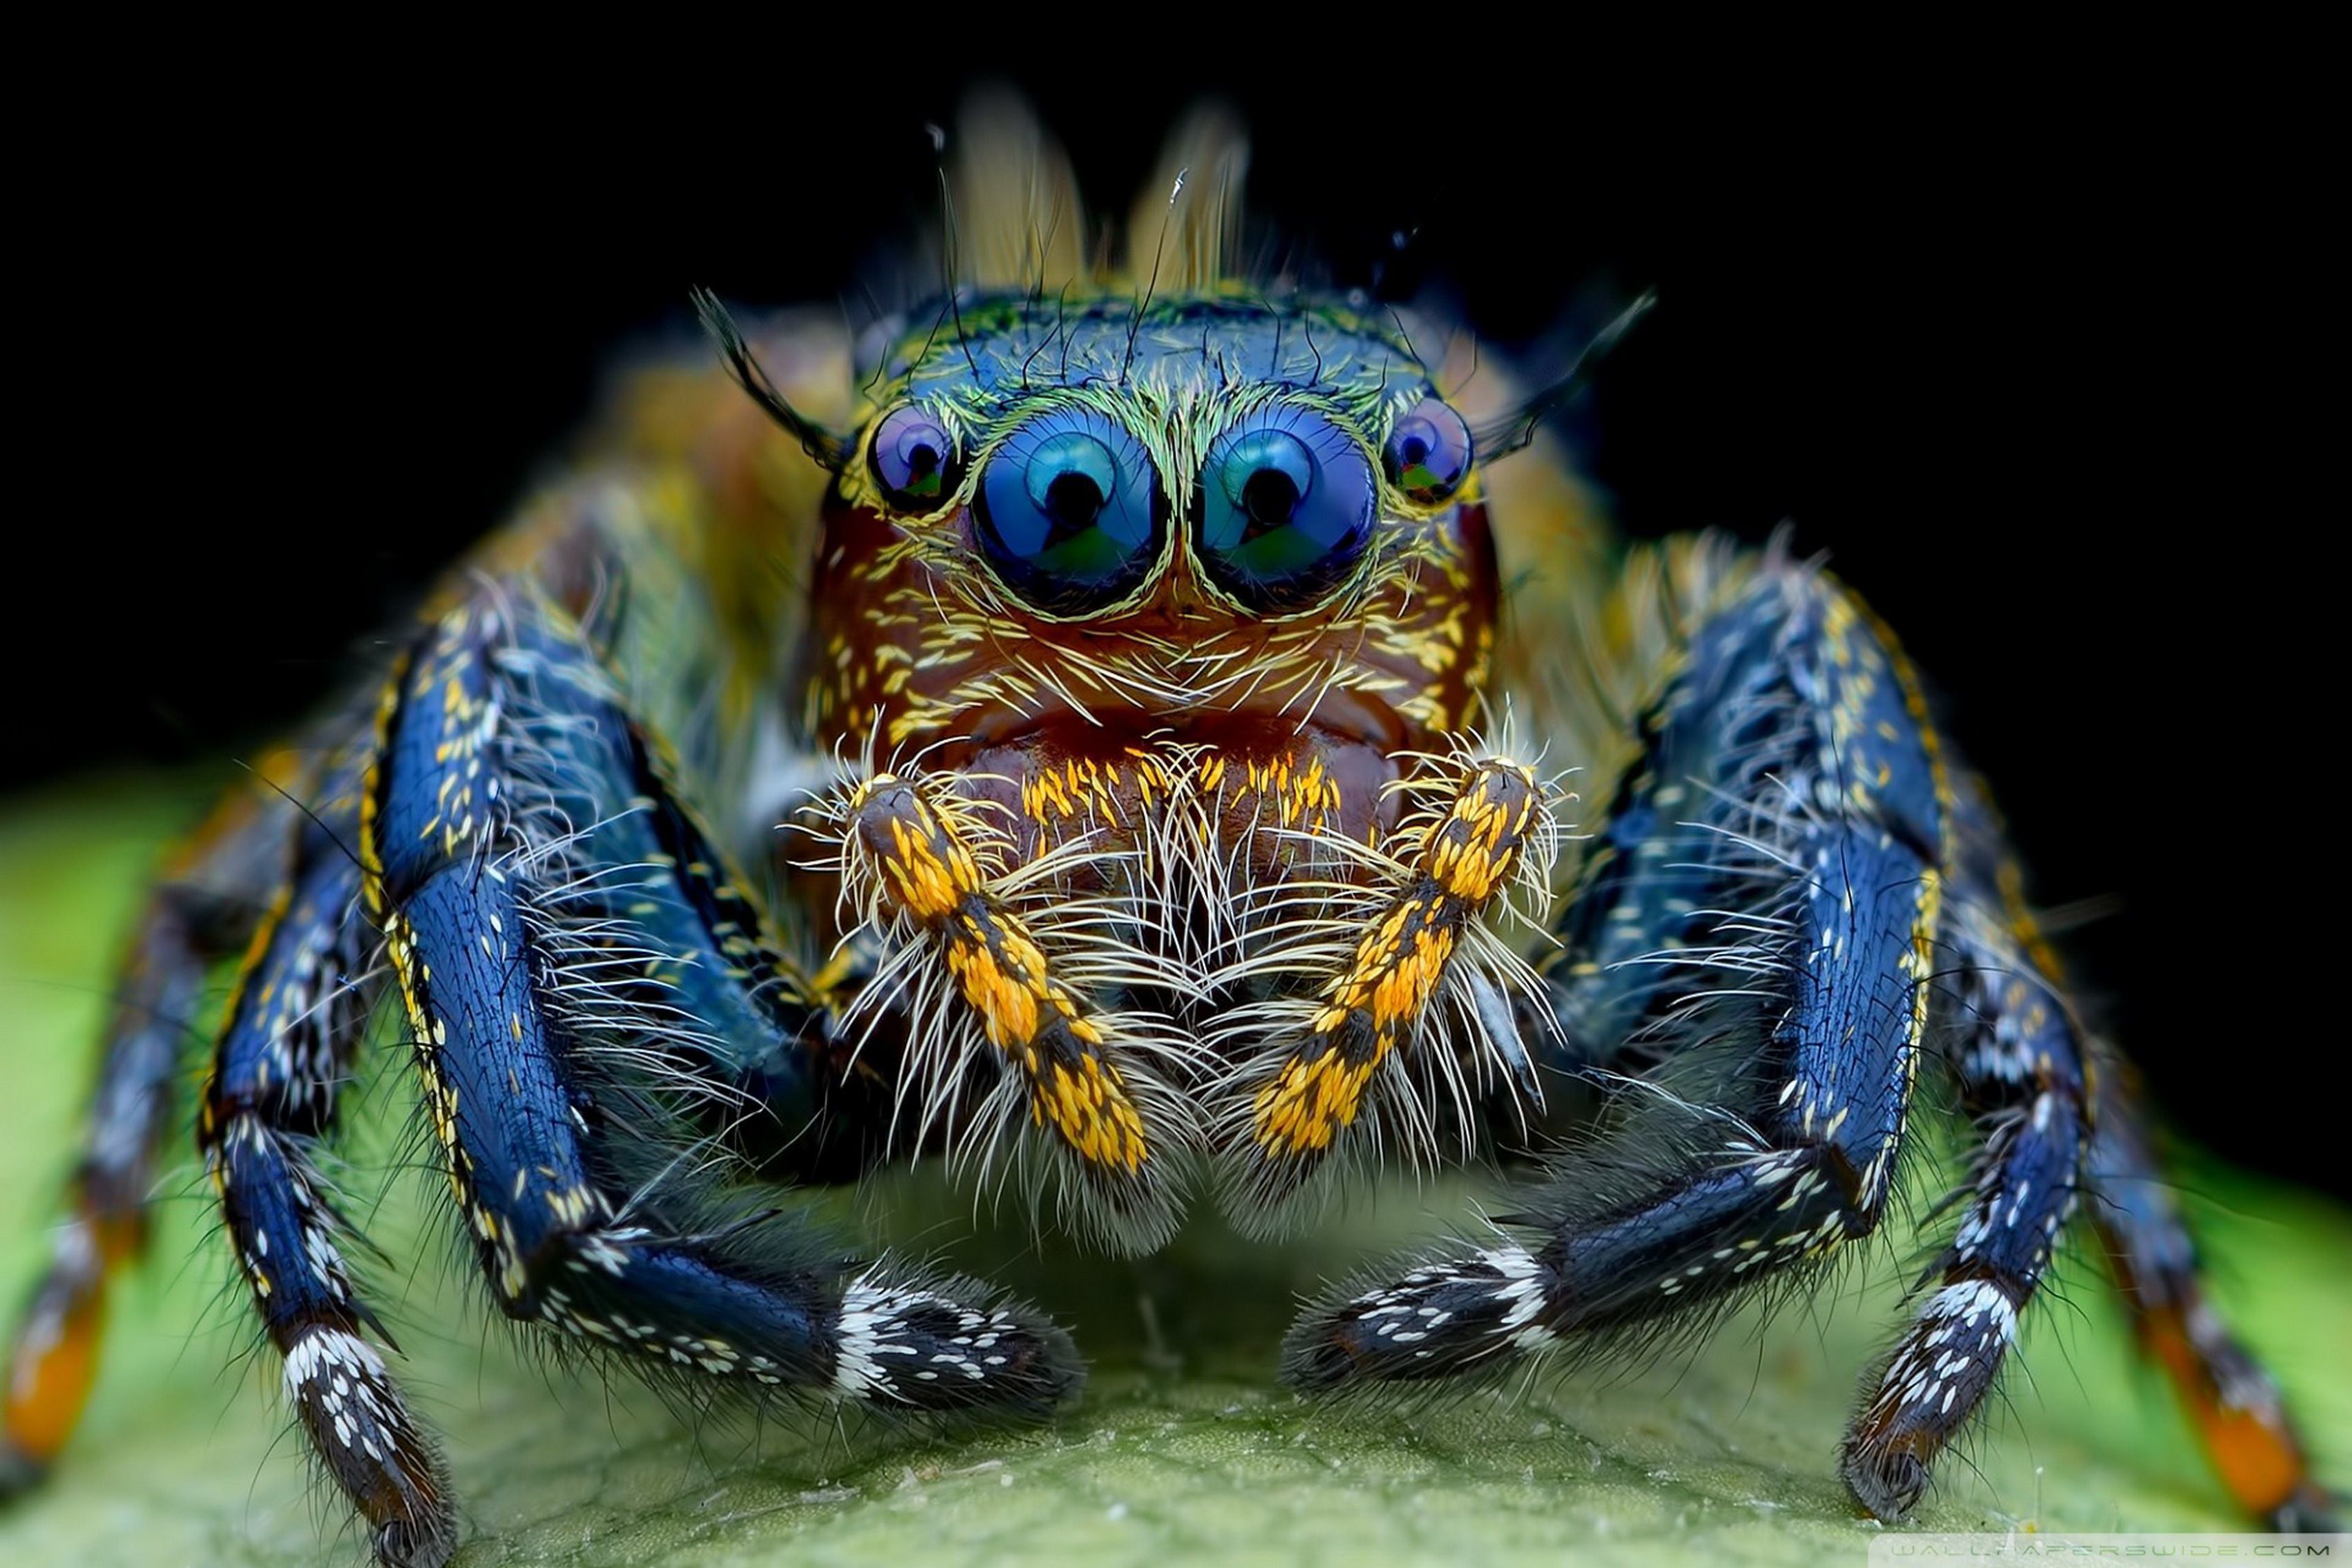 Jumping Spider - Spider Faces Up Close - HD Wallpaper 